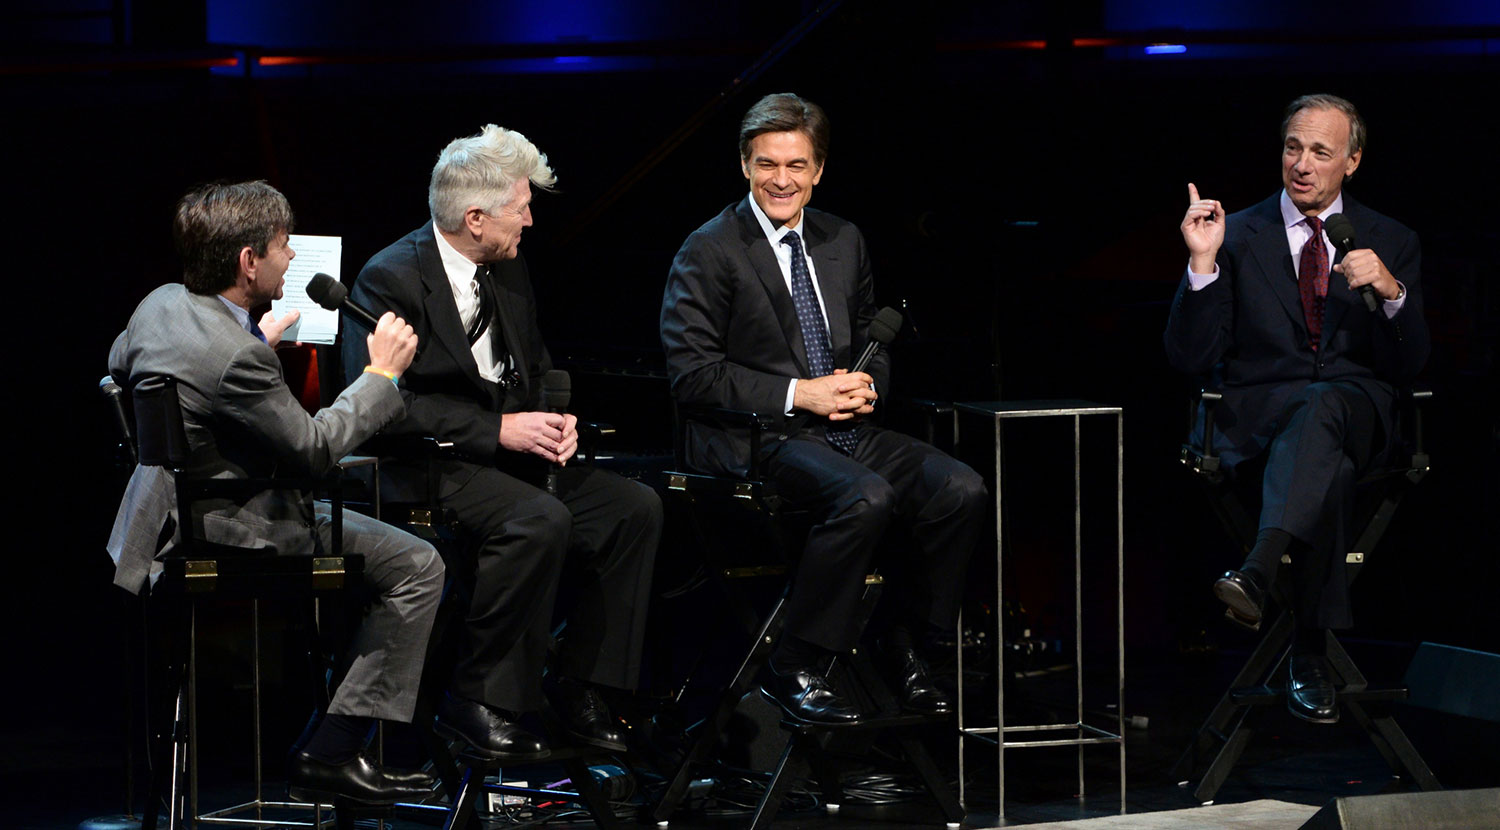 From left: George Stephanopoulos, David Lynch, Dr. Mehmet Oz, and Ray Dalio 